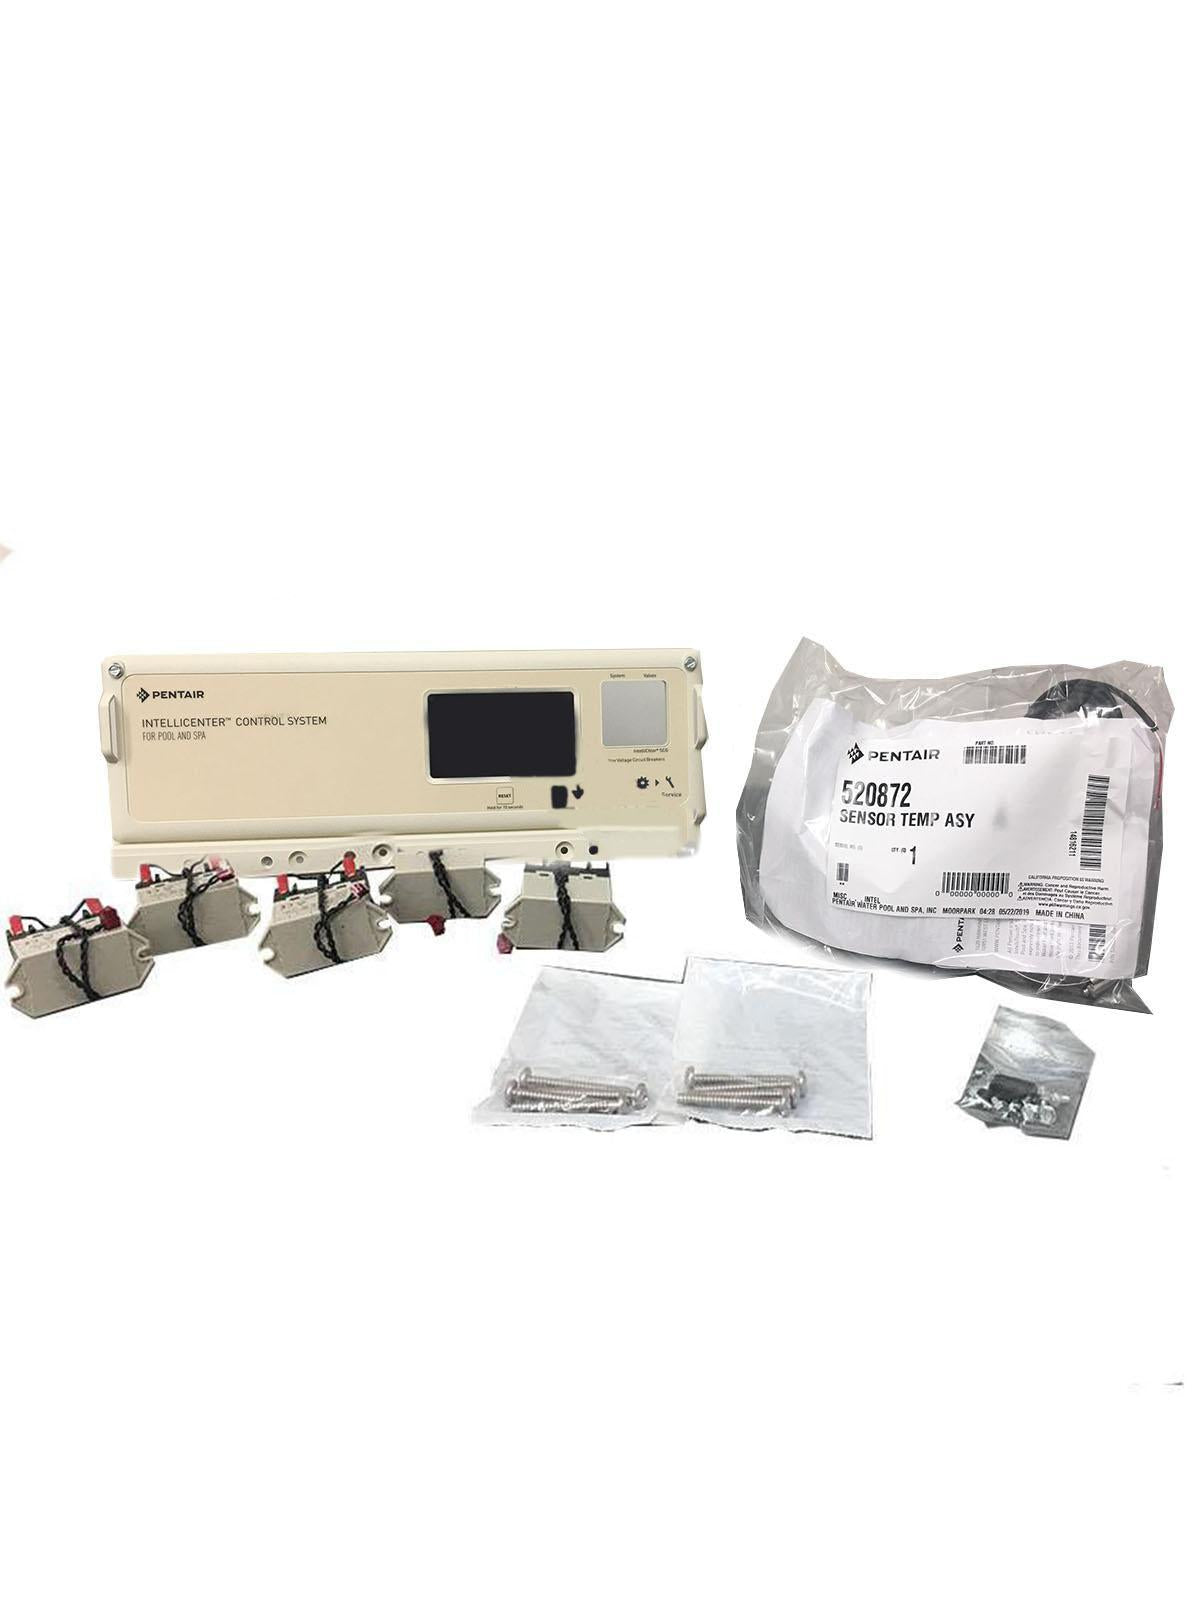 Pentair IntelliCenter i10D Automation System